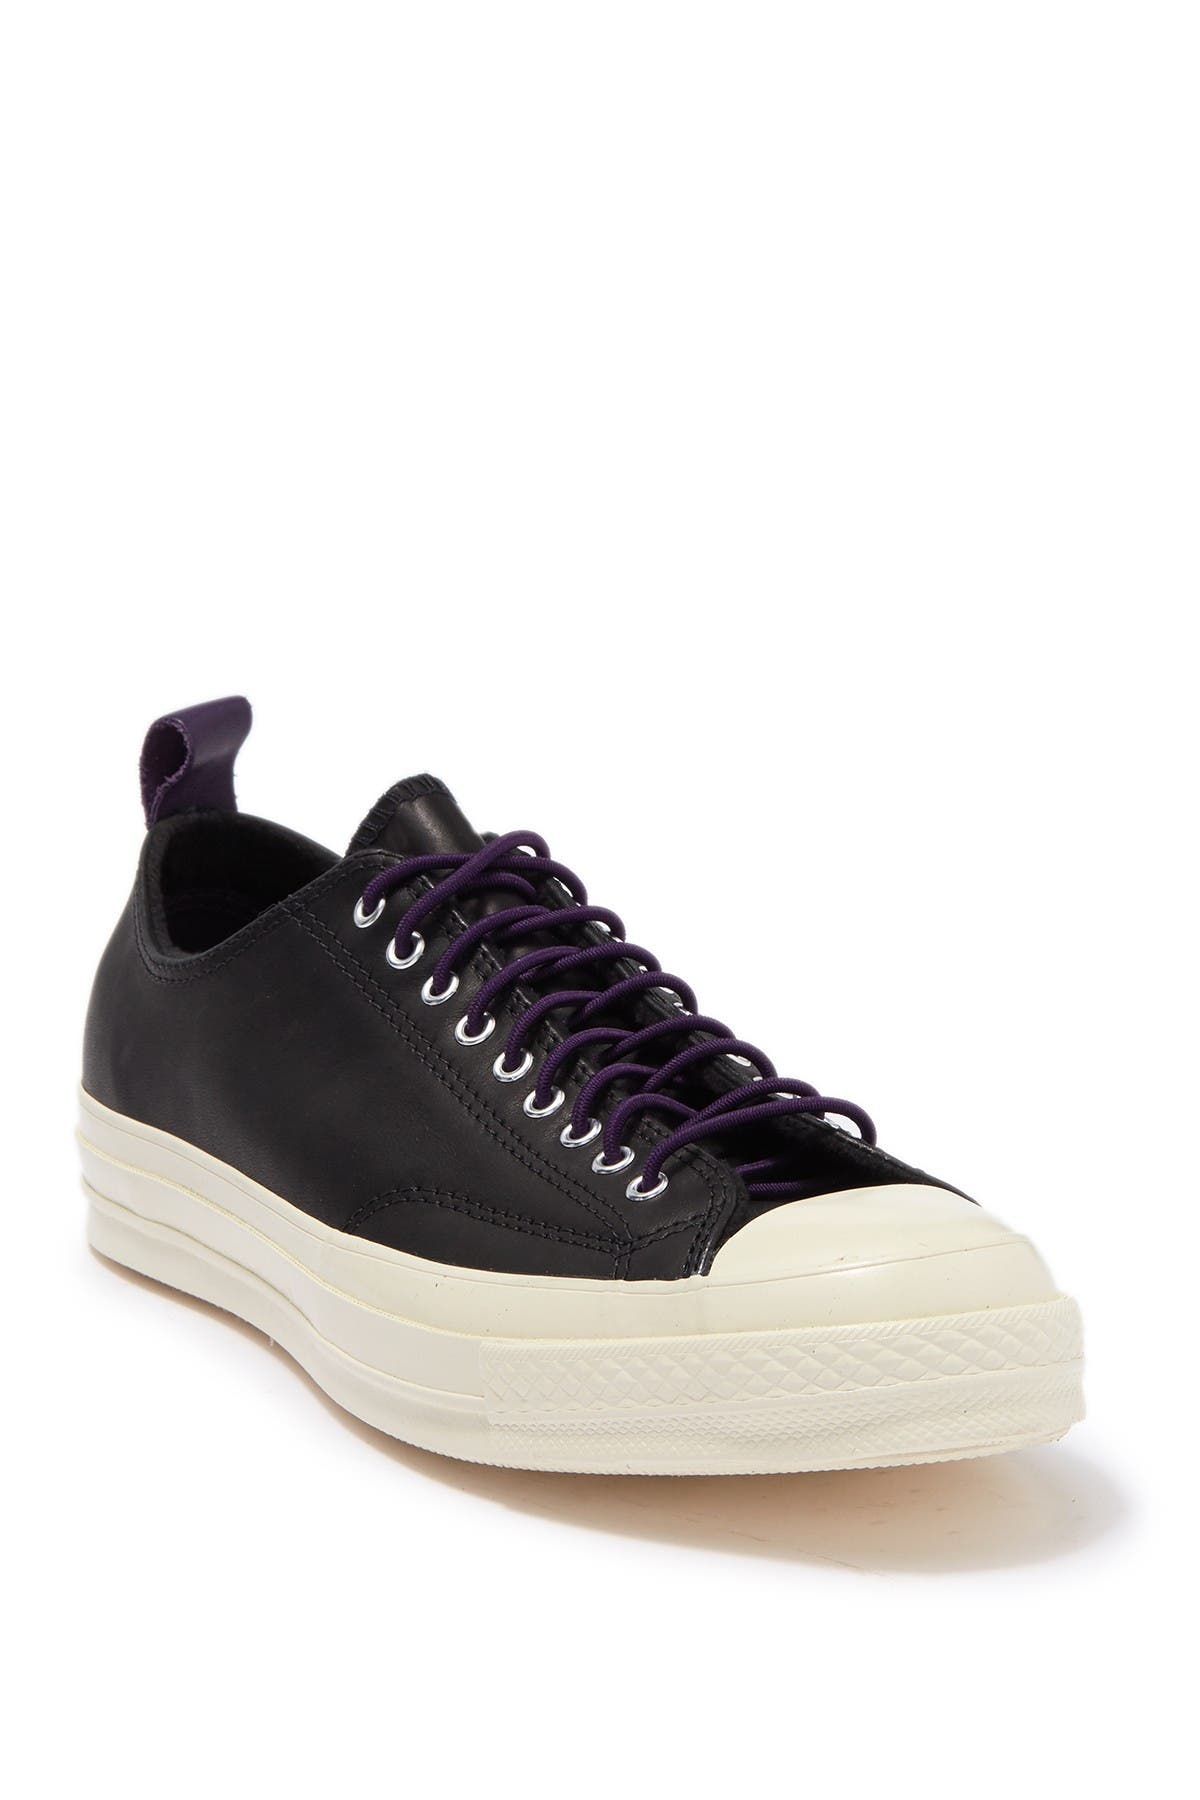 Converse Chuck Taylor 70 Leather Sneaker In Black